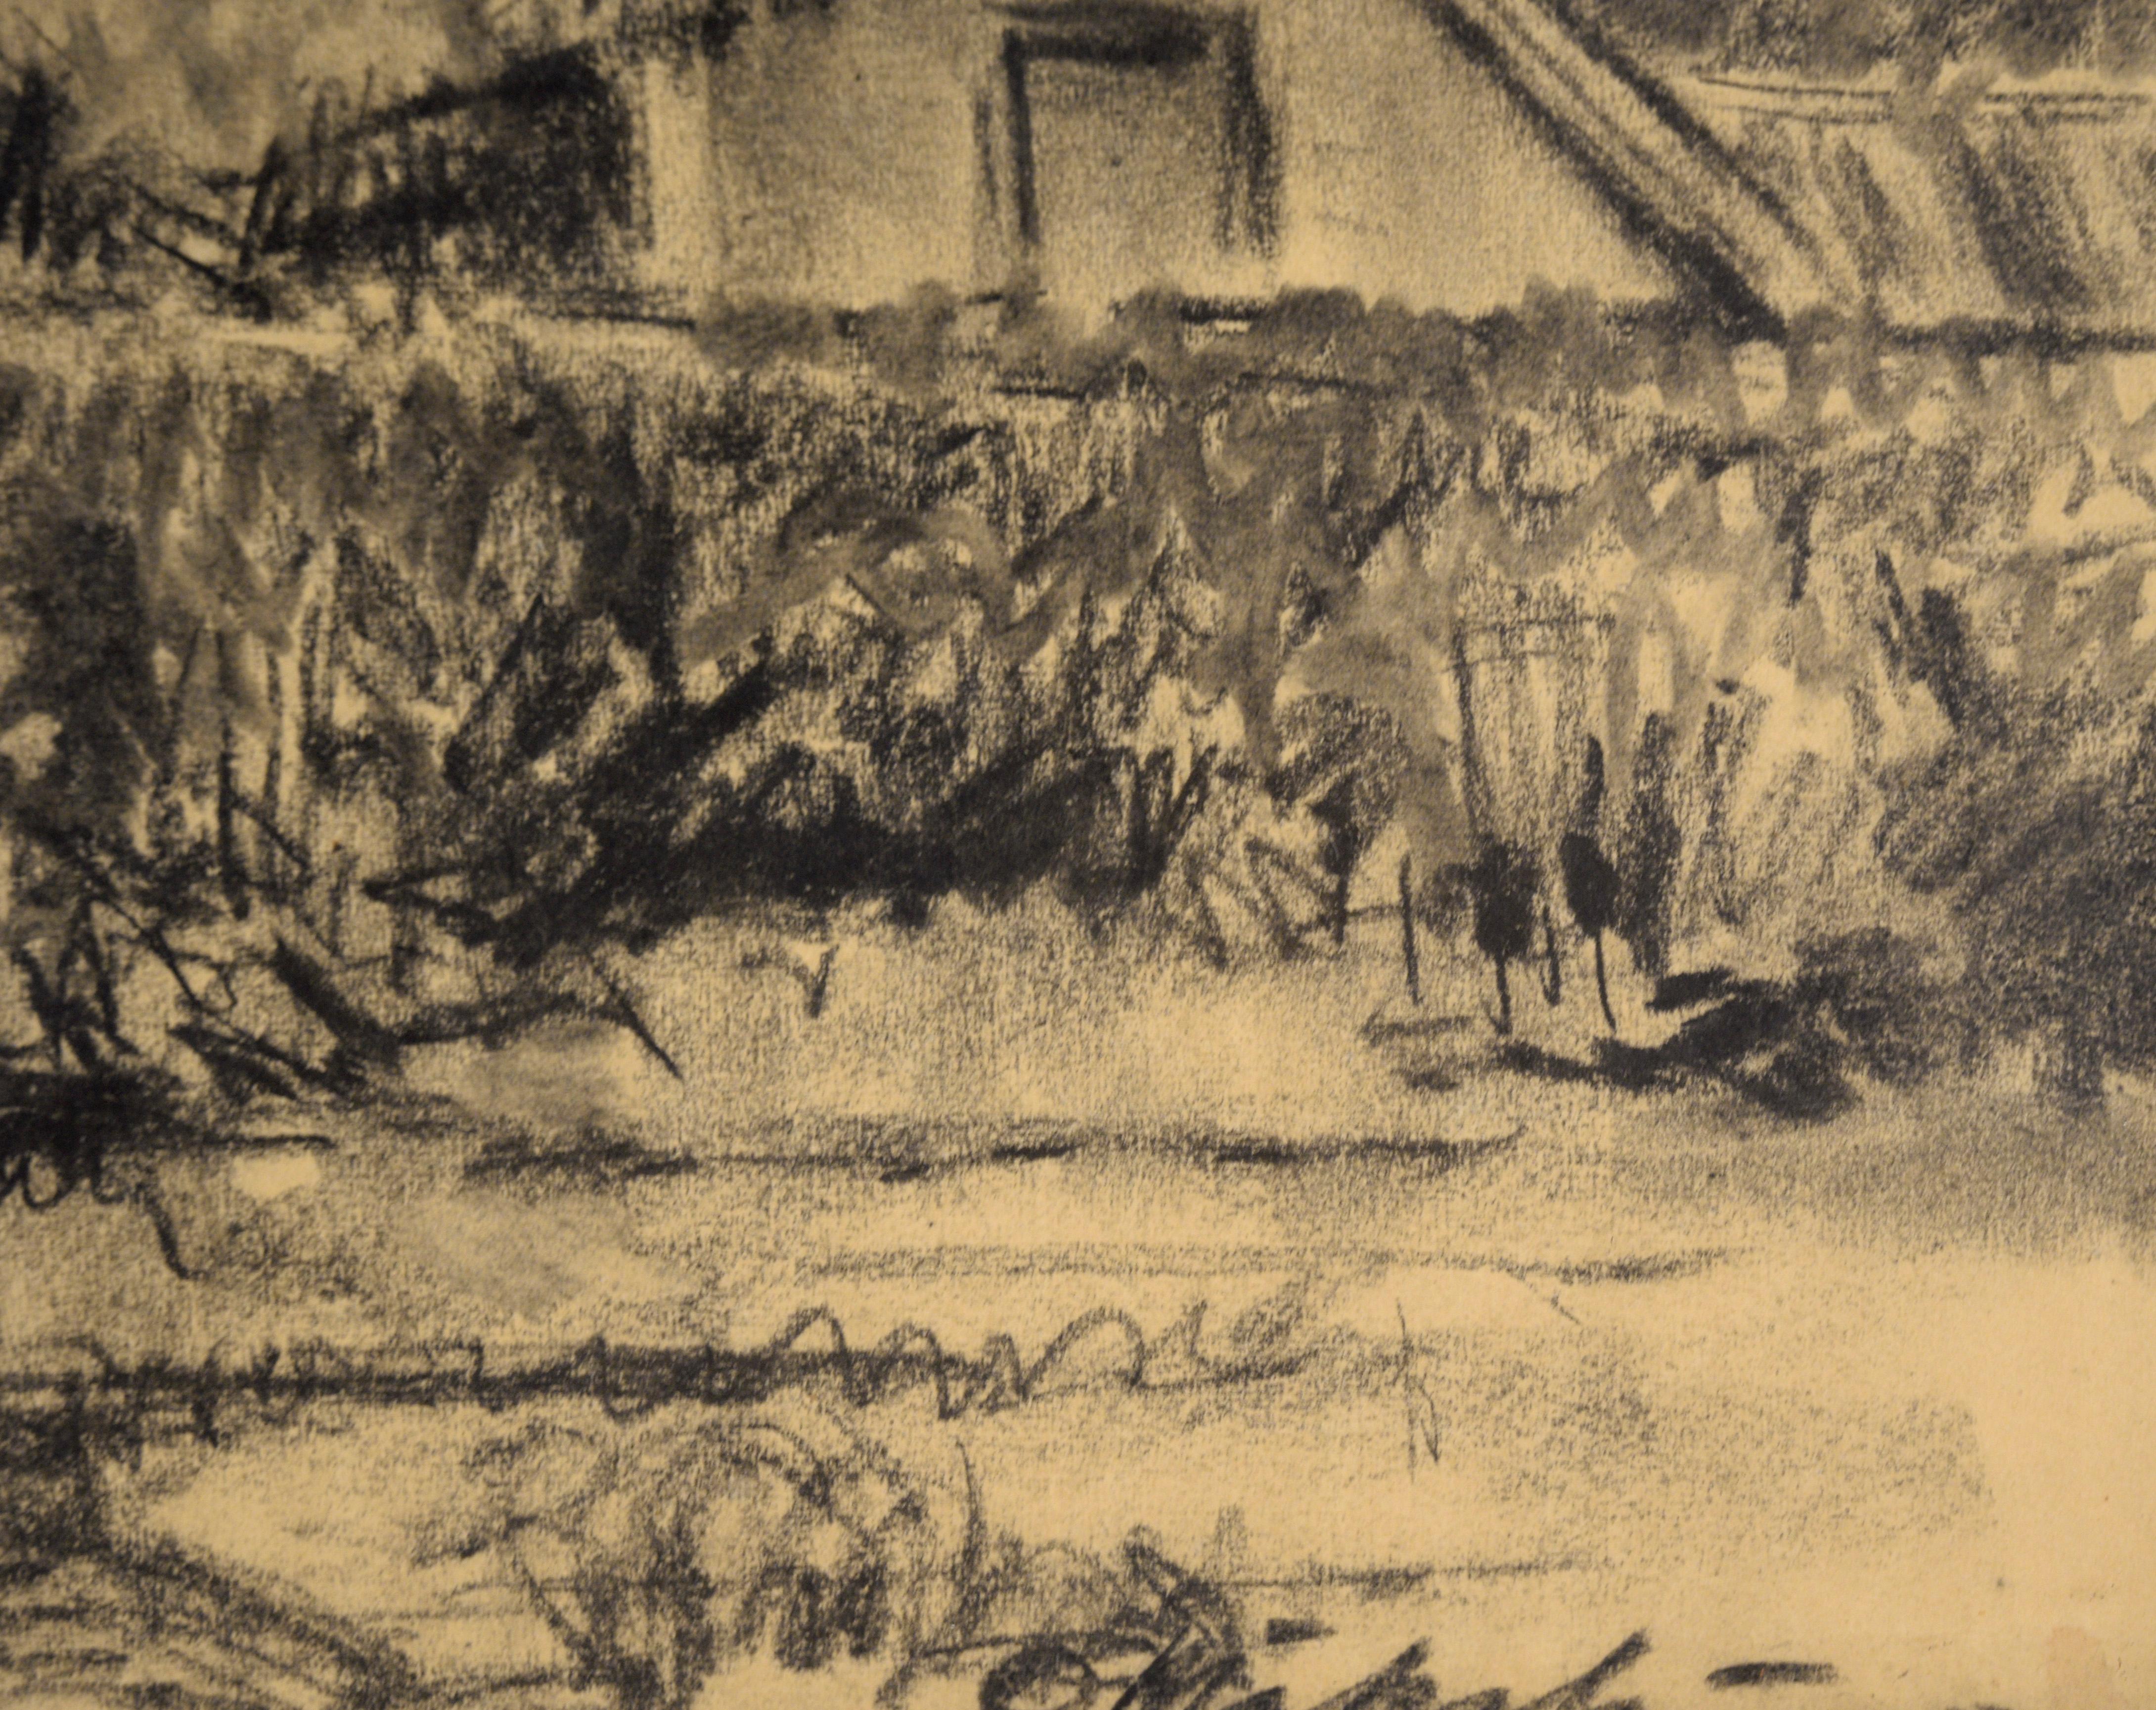 Blooming Apple Tree on Union Street - Finnish Landscape in Charcoal on Paper - Gray Landscape Art by Otto Makila